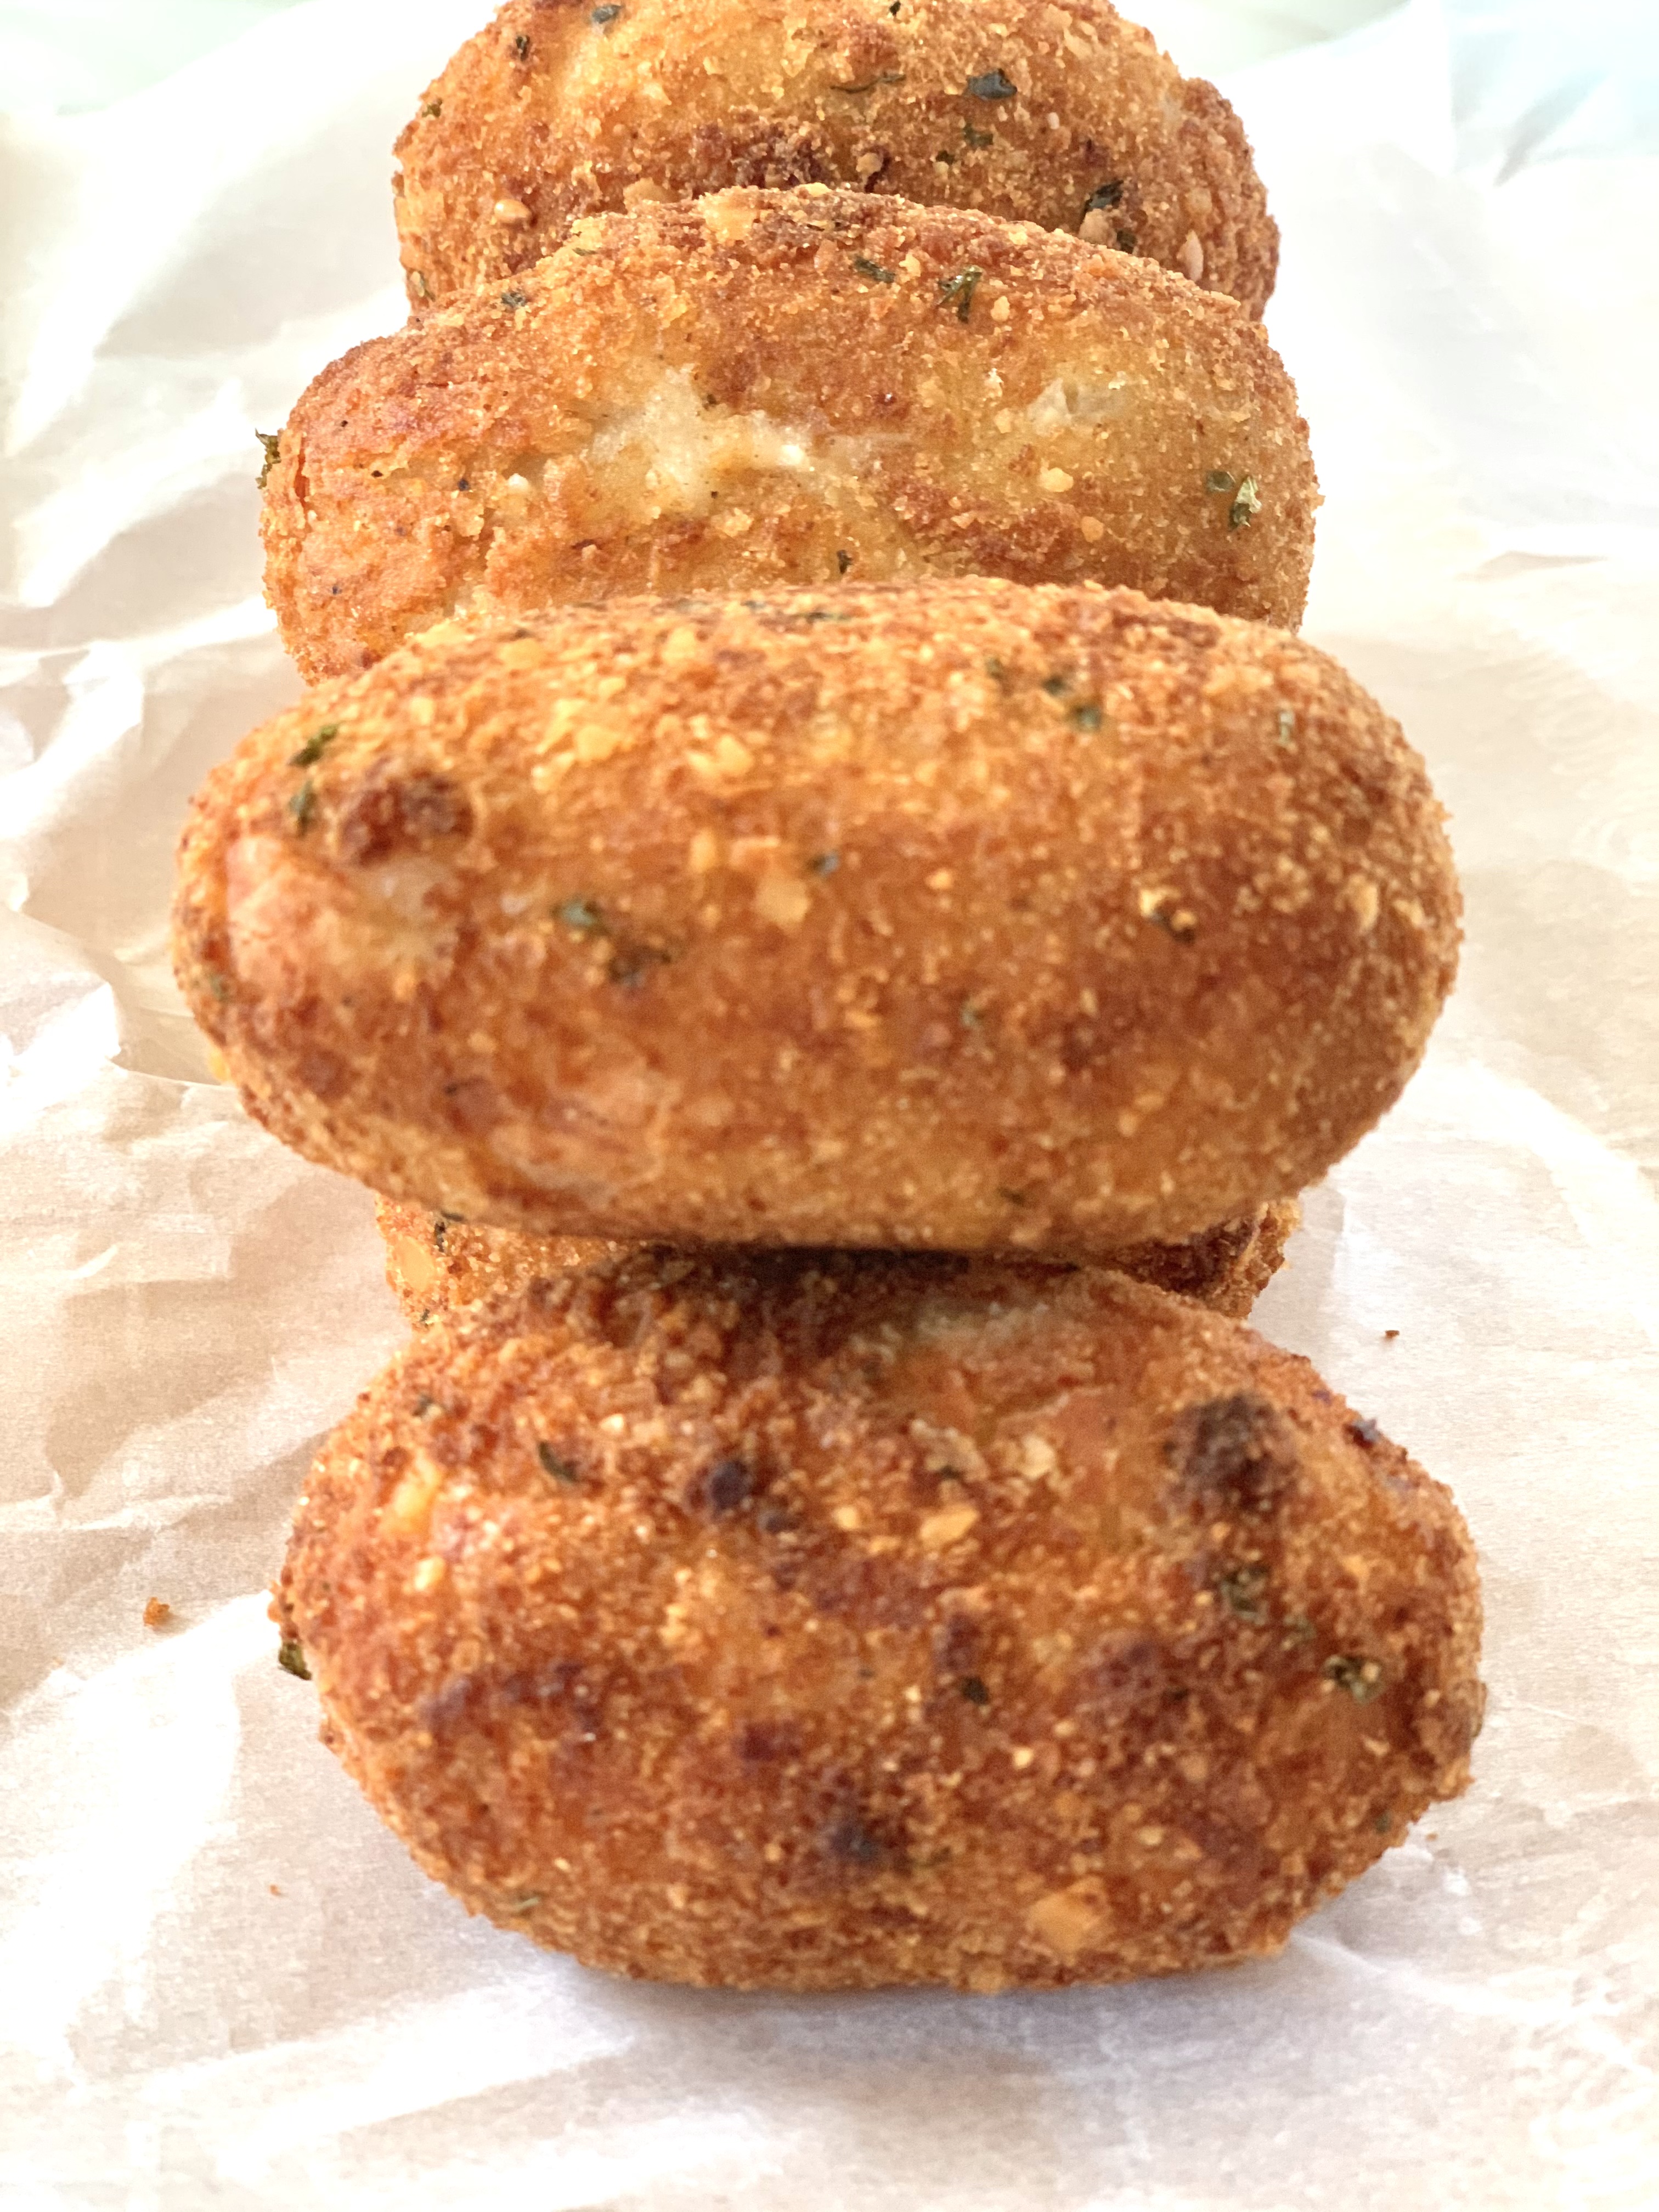 Crispy and churchy croquettes